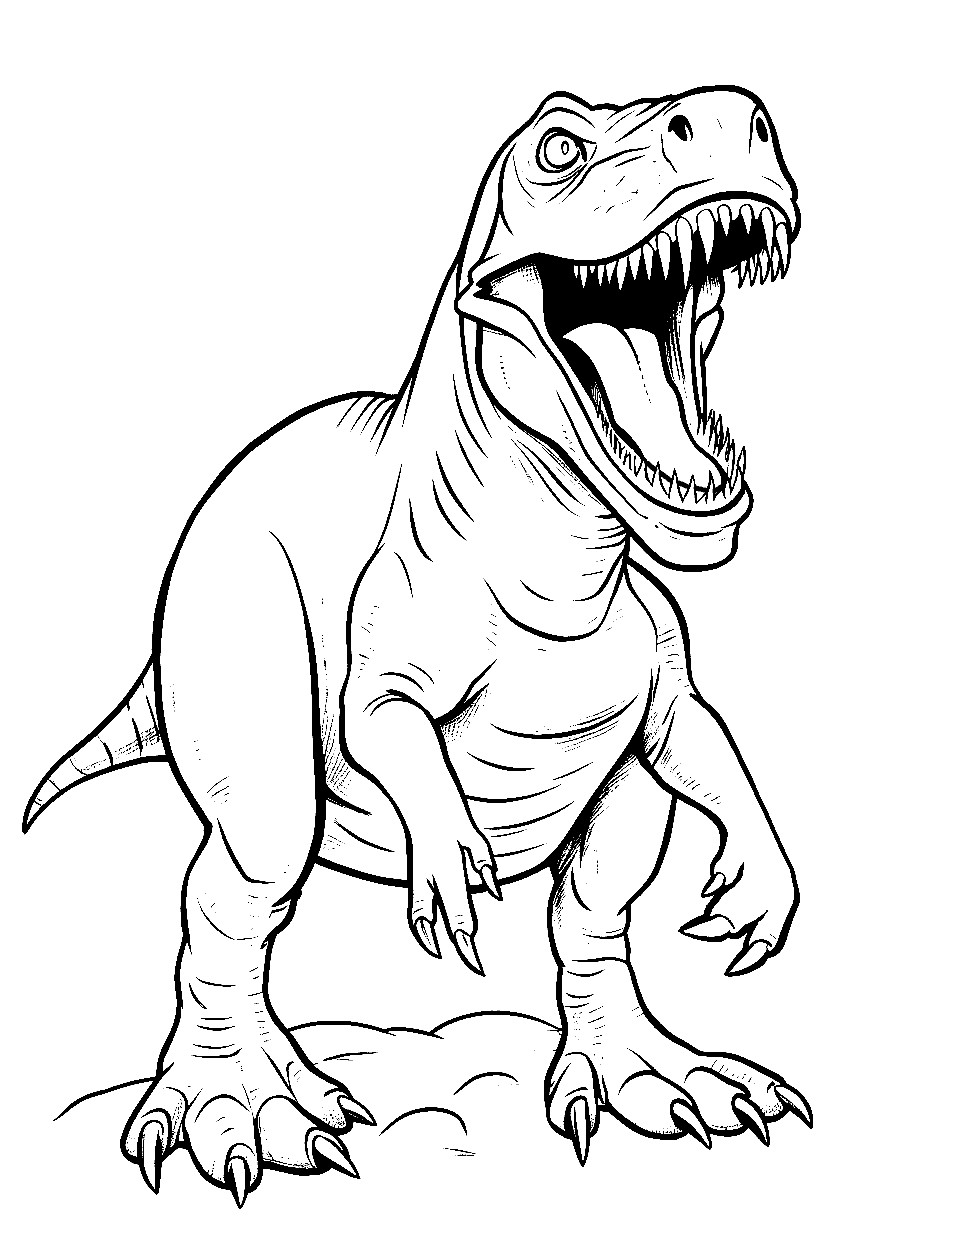 Angry T Rex T-rex Coloring Page - A T-Rex in roaring, trying to scare its prey.